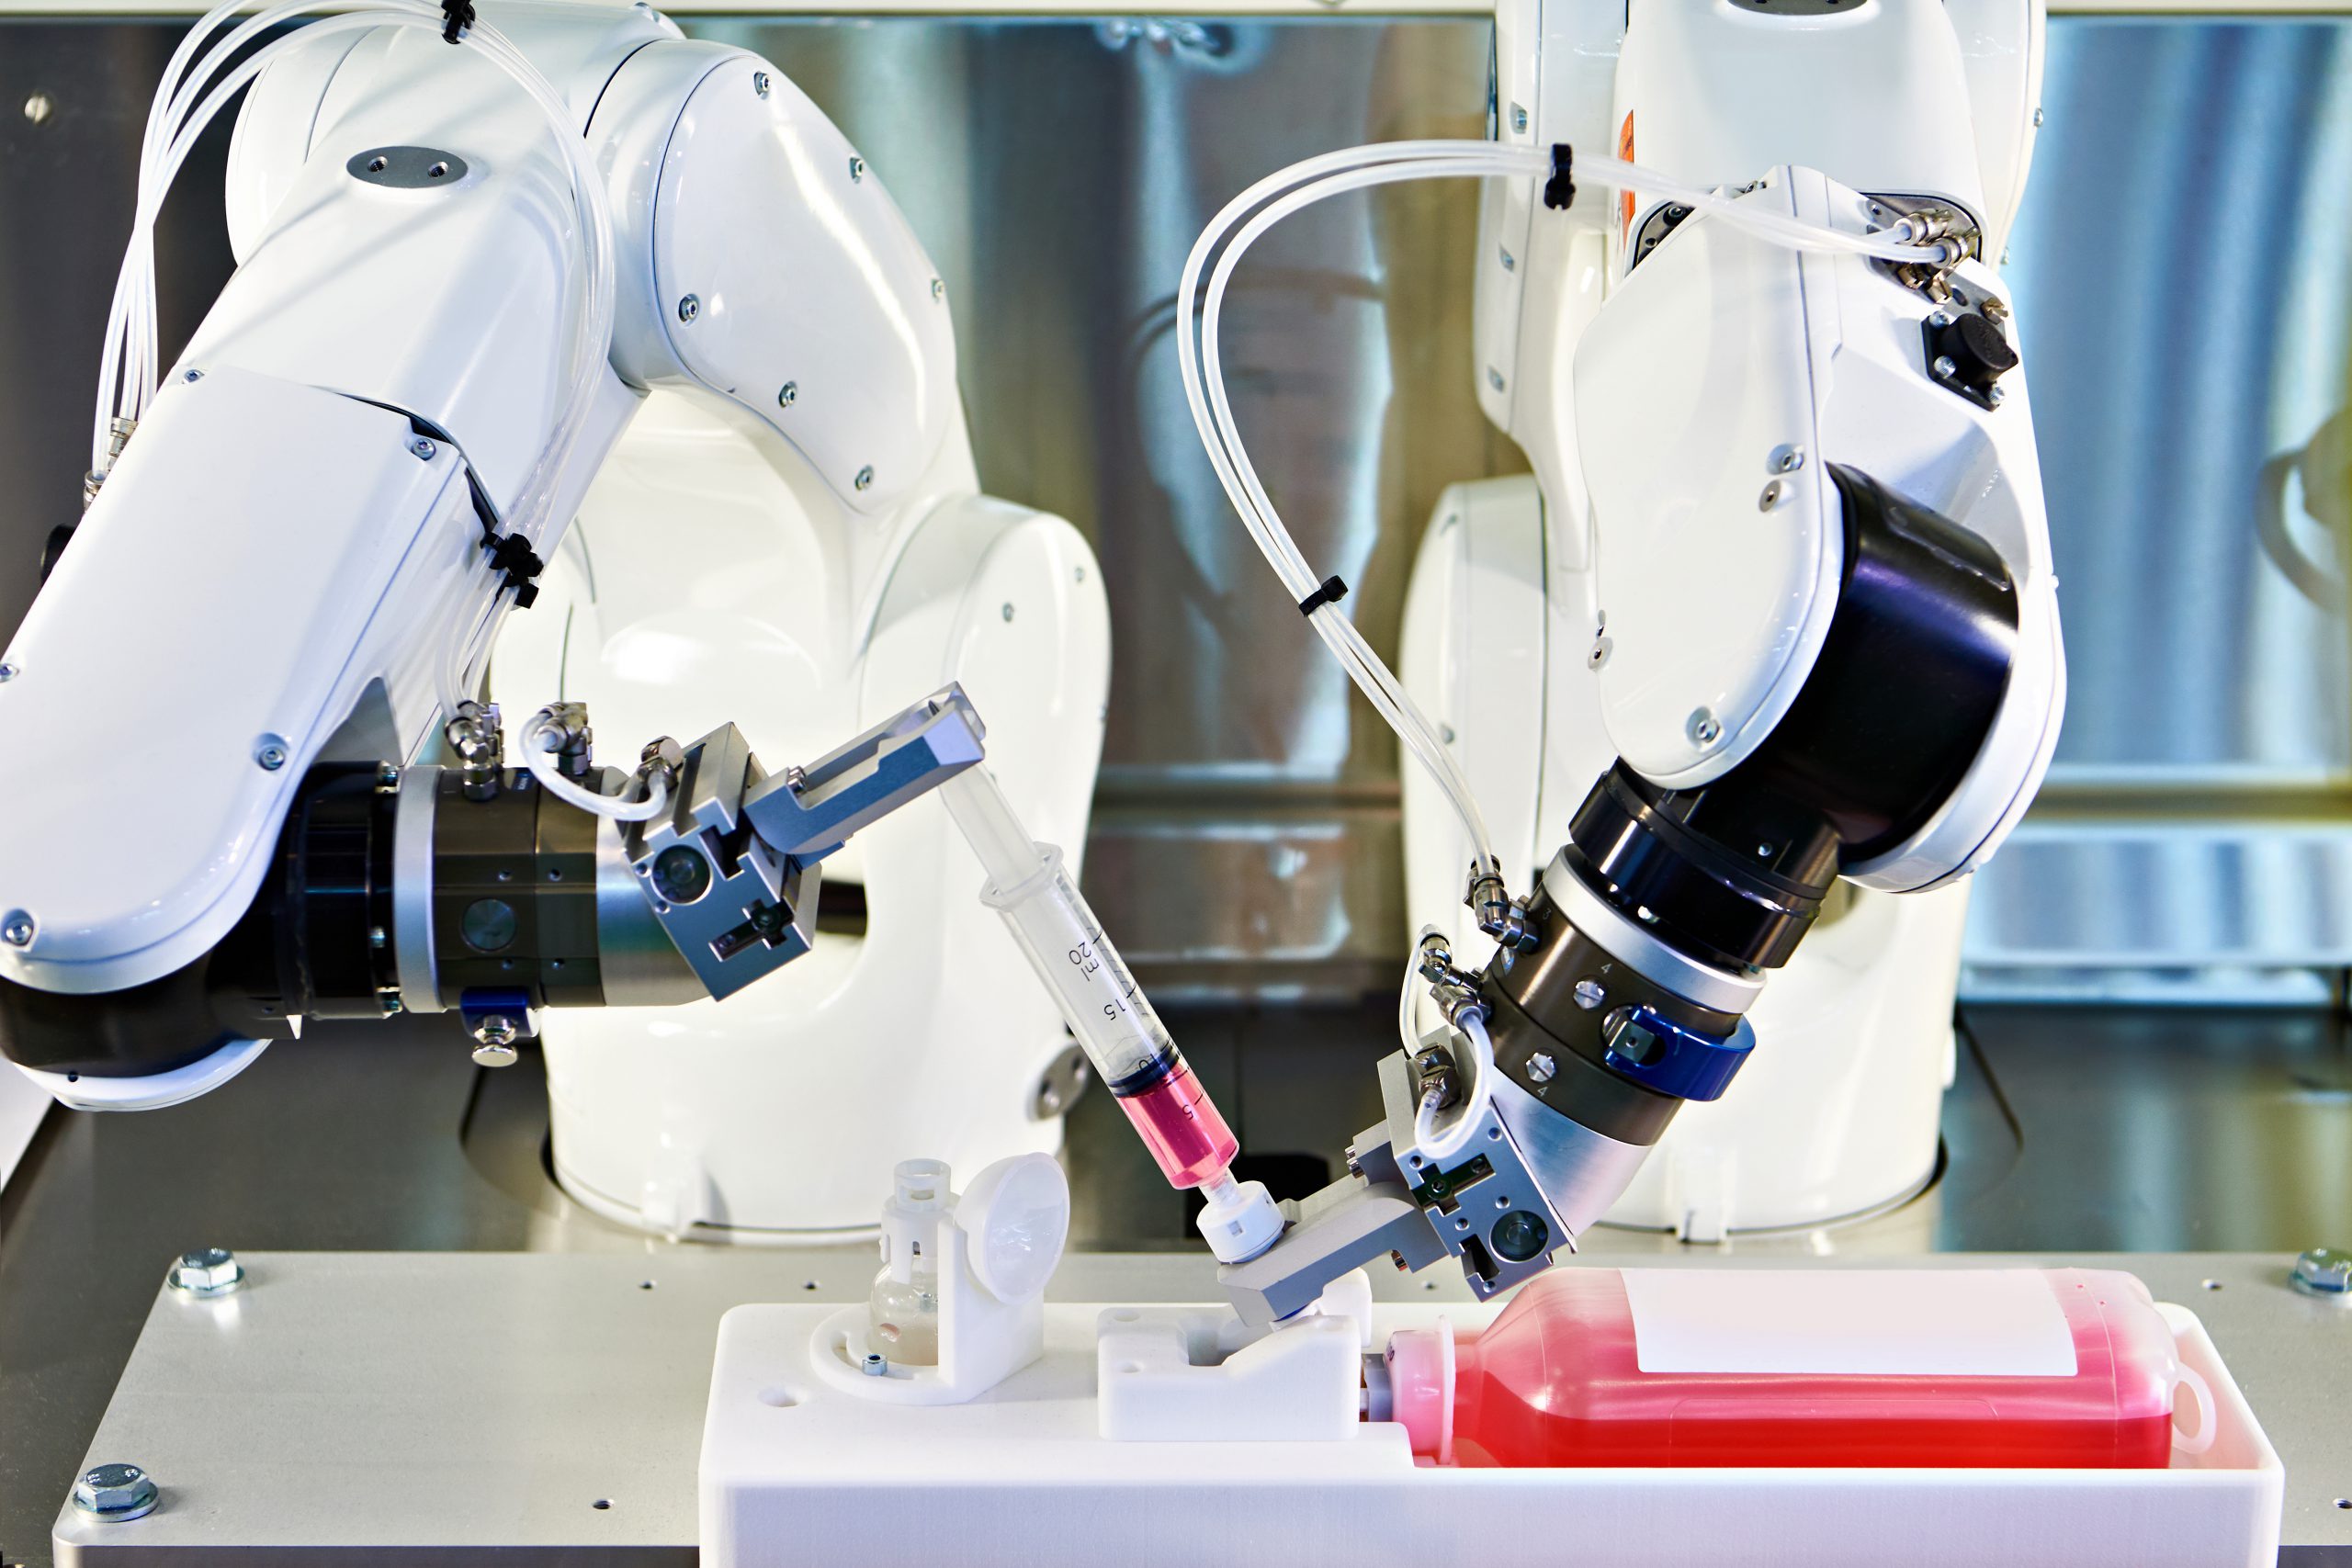 Driving Robotics and Automation in Medicines manufacturing and development